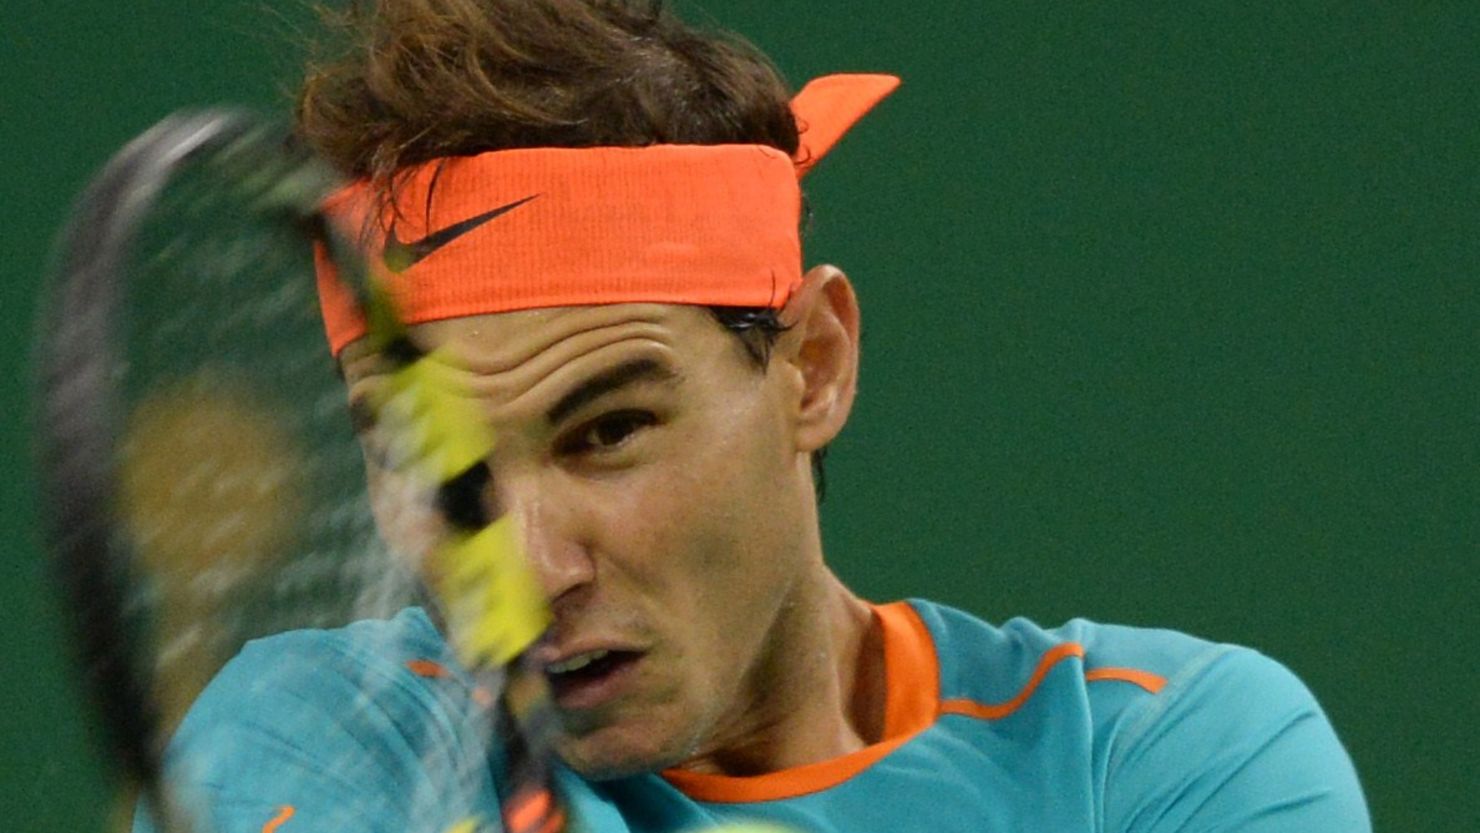 Rafael Nadal opted to play in Shanghai Masters despite being diagnosed with appendicitis by doctors in the Chinese city.